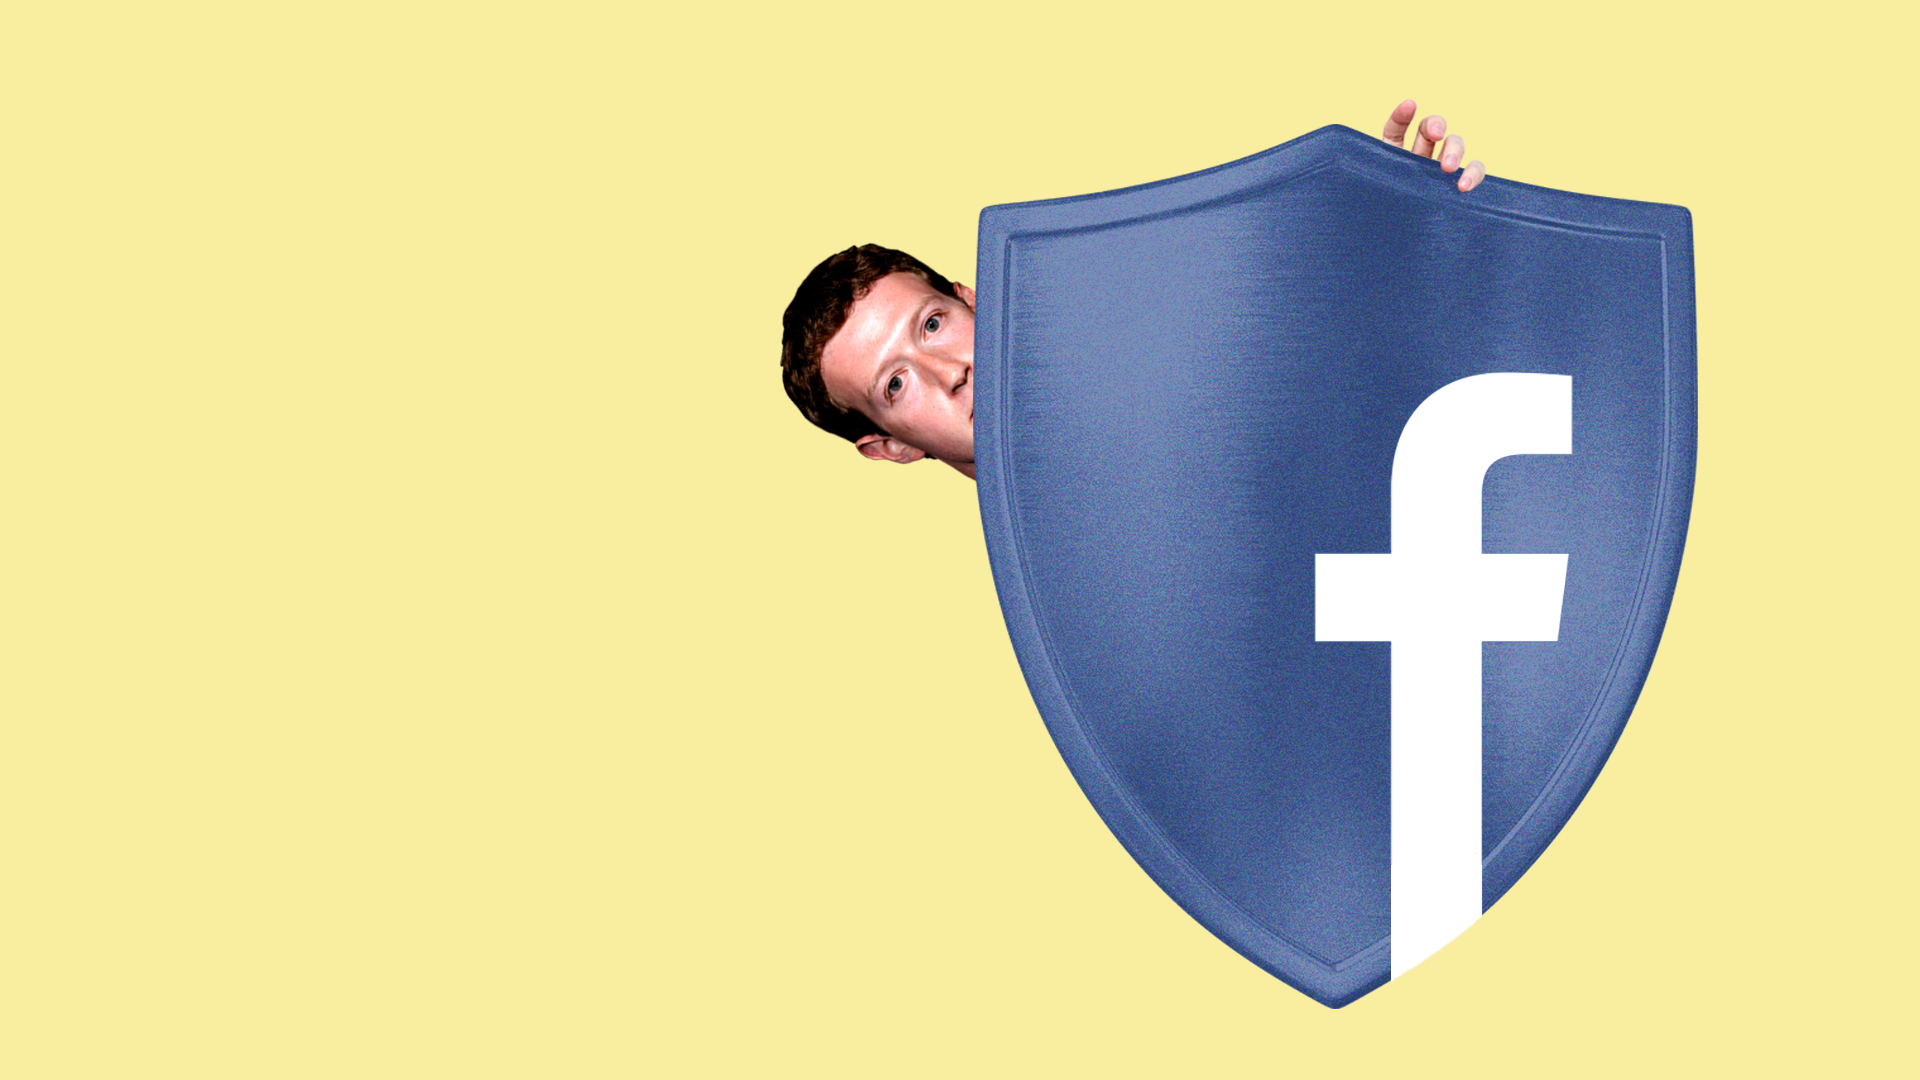 Mark Zuckerberg looks out from behind a shield with the Facebook logo on it